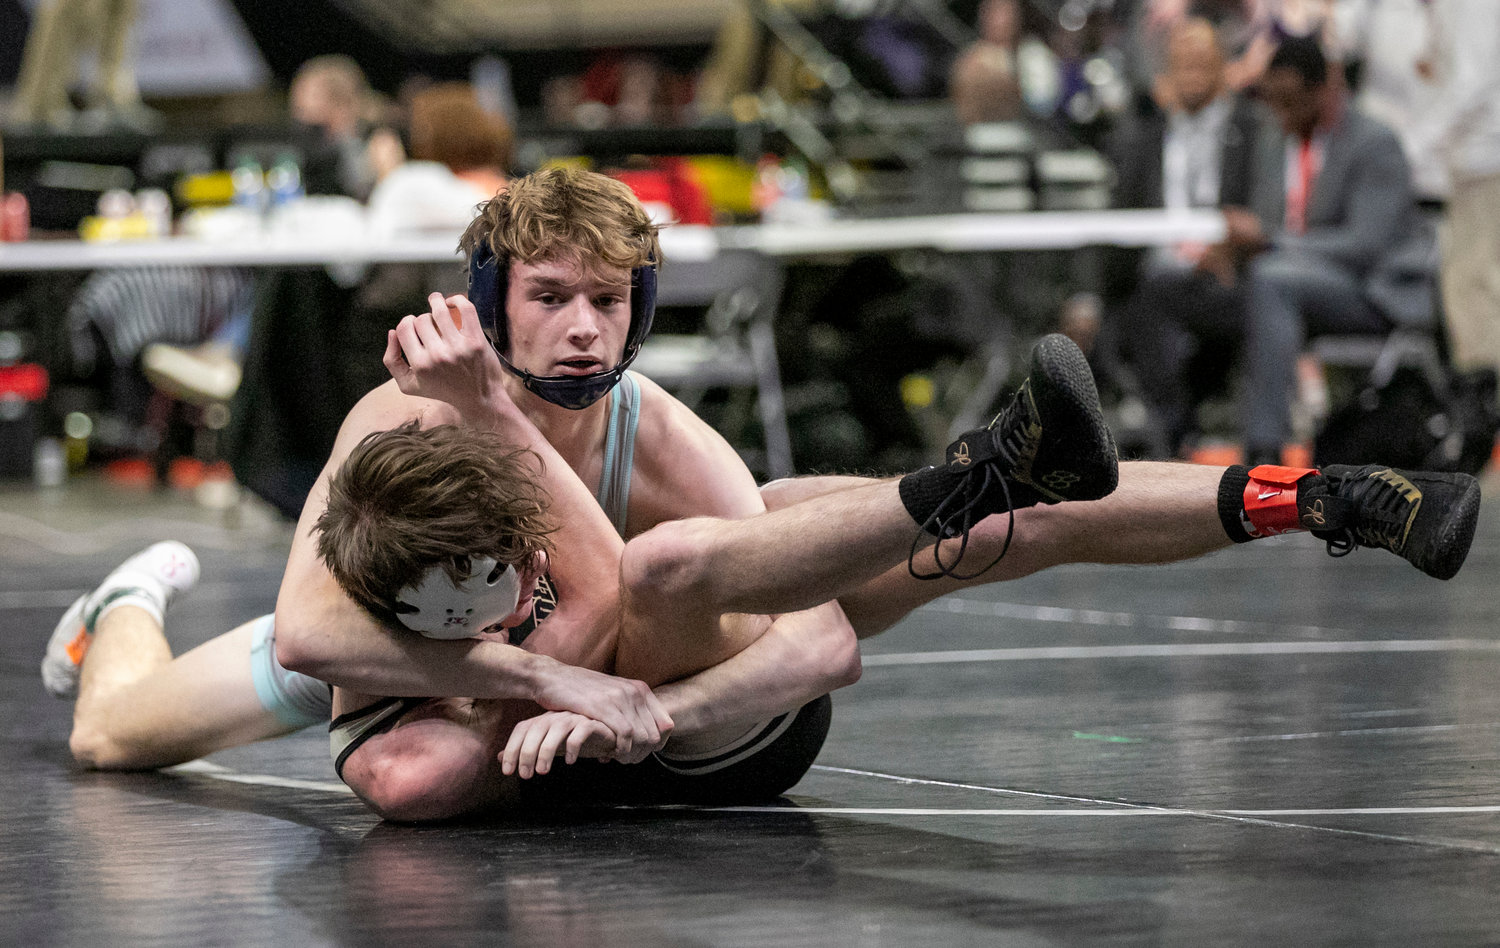 Gulf Shores junior Ethan Sharkey pulls together a head lock during the 134-pound match for the dual consolation finals at Birmingham’s Bill Harris Arena Friday, Jan. 20. Sharkey earned a 10-8 decision to score points for the Dolphins against the Hayden Wildcats.